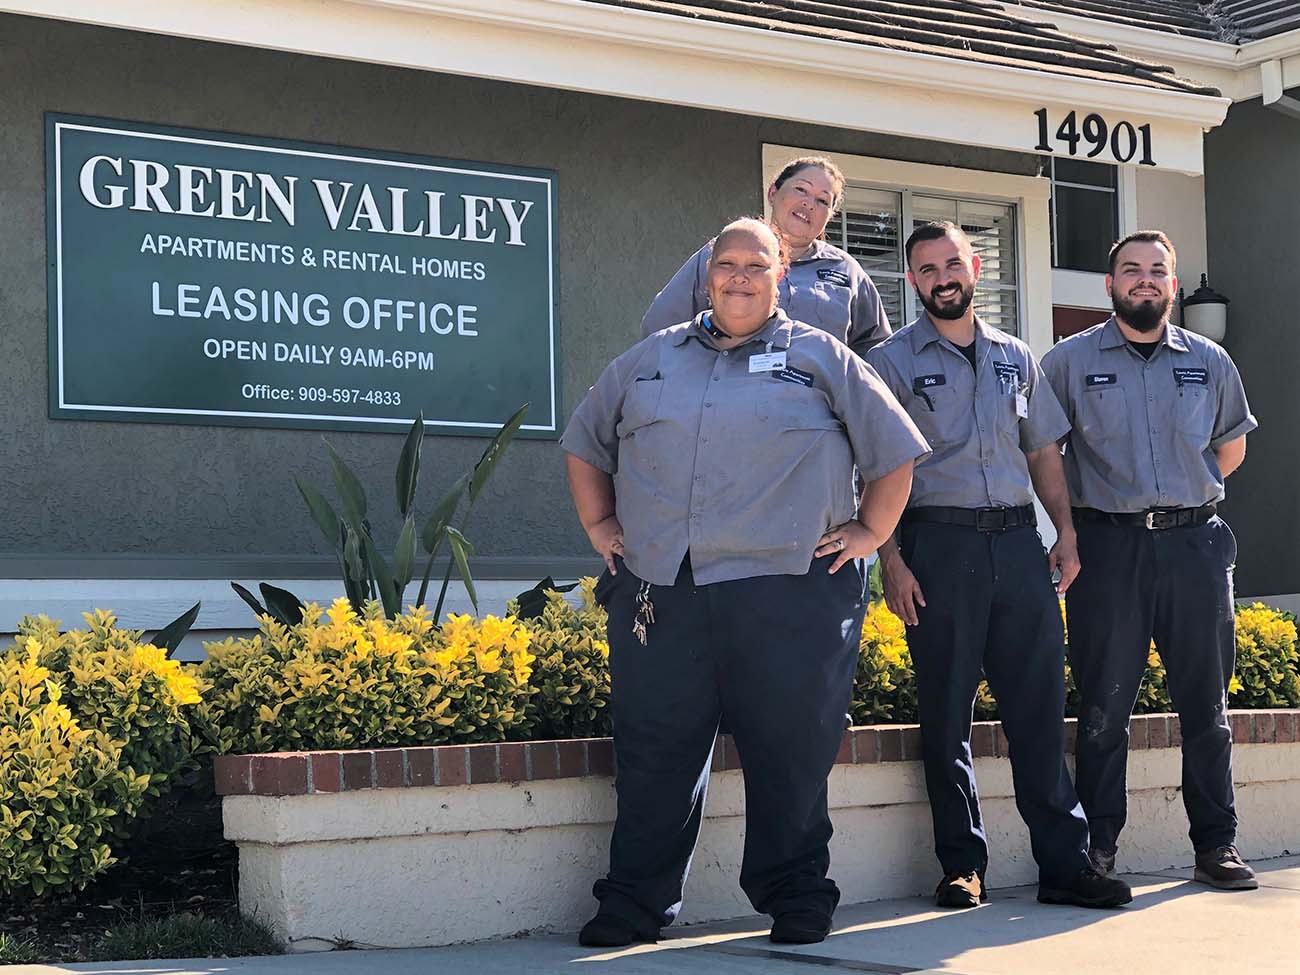 What is a grounds keeper - Green valley groundskeeper in front of leasing office